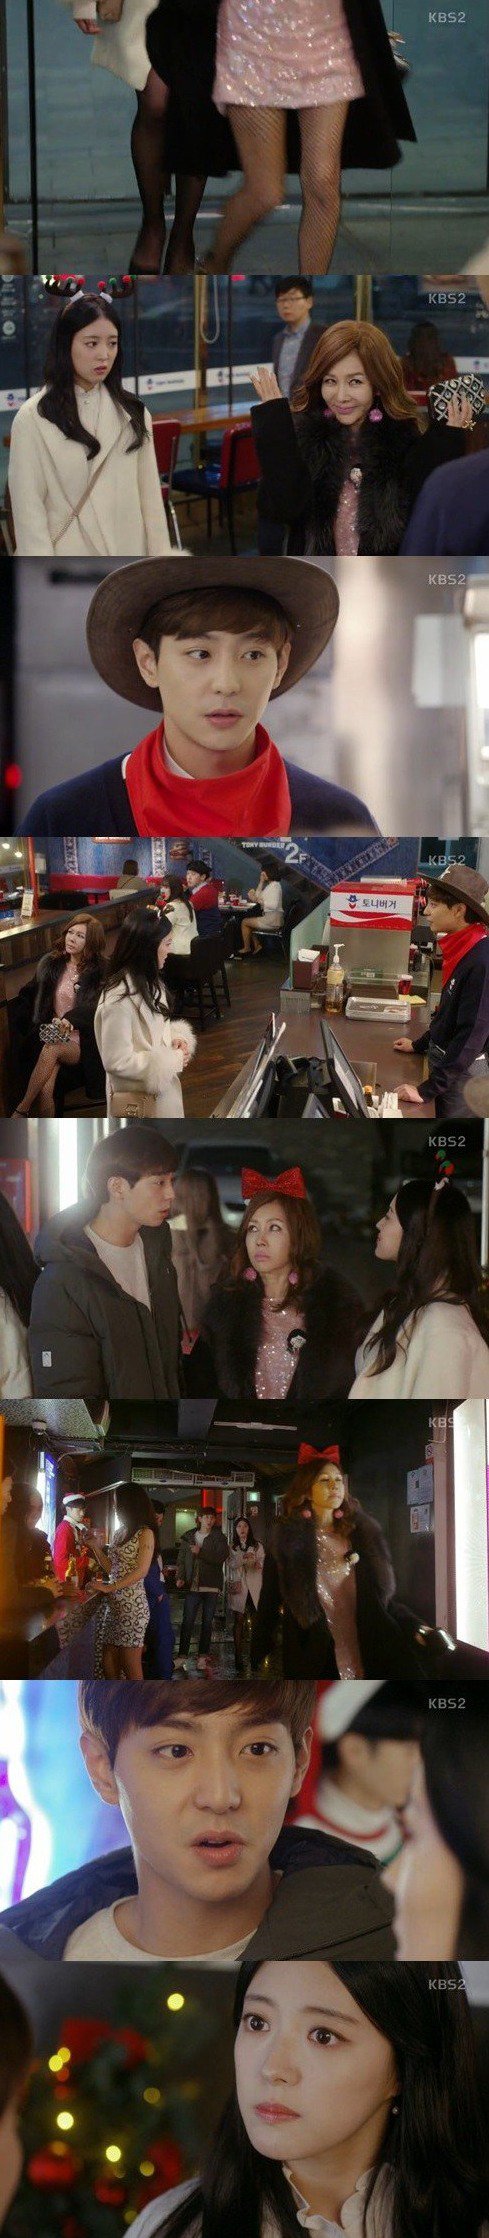 episodes 35 and 36 captures for the Korean drama 'The Gentlemen of Wolgyesu Tailor Shop'